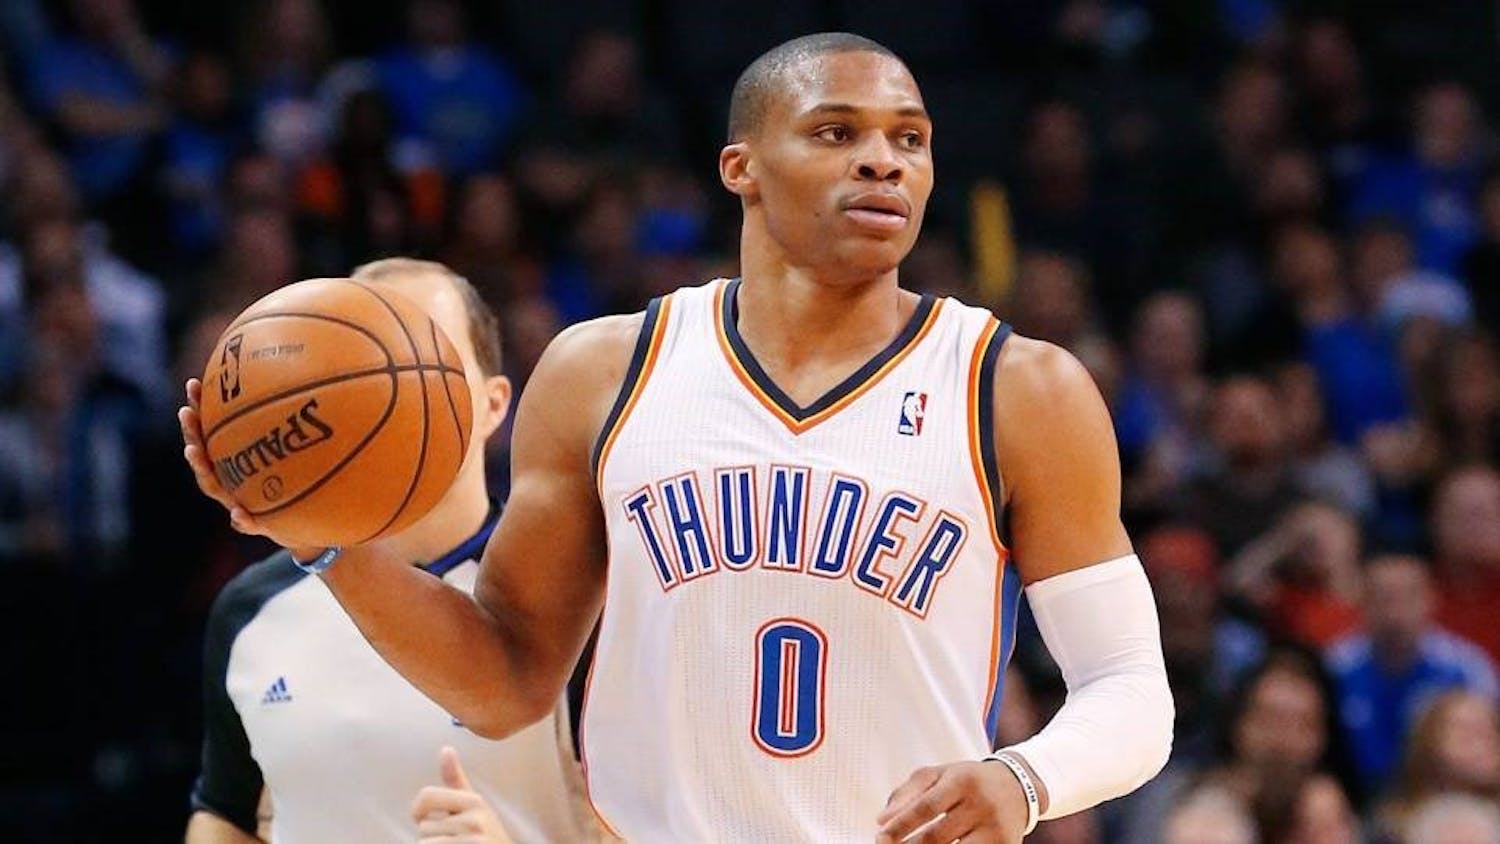 Russell Westbrook has been the key to the Oklahoma City Thunder’s playoff push